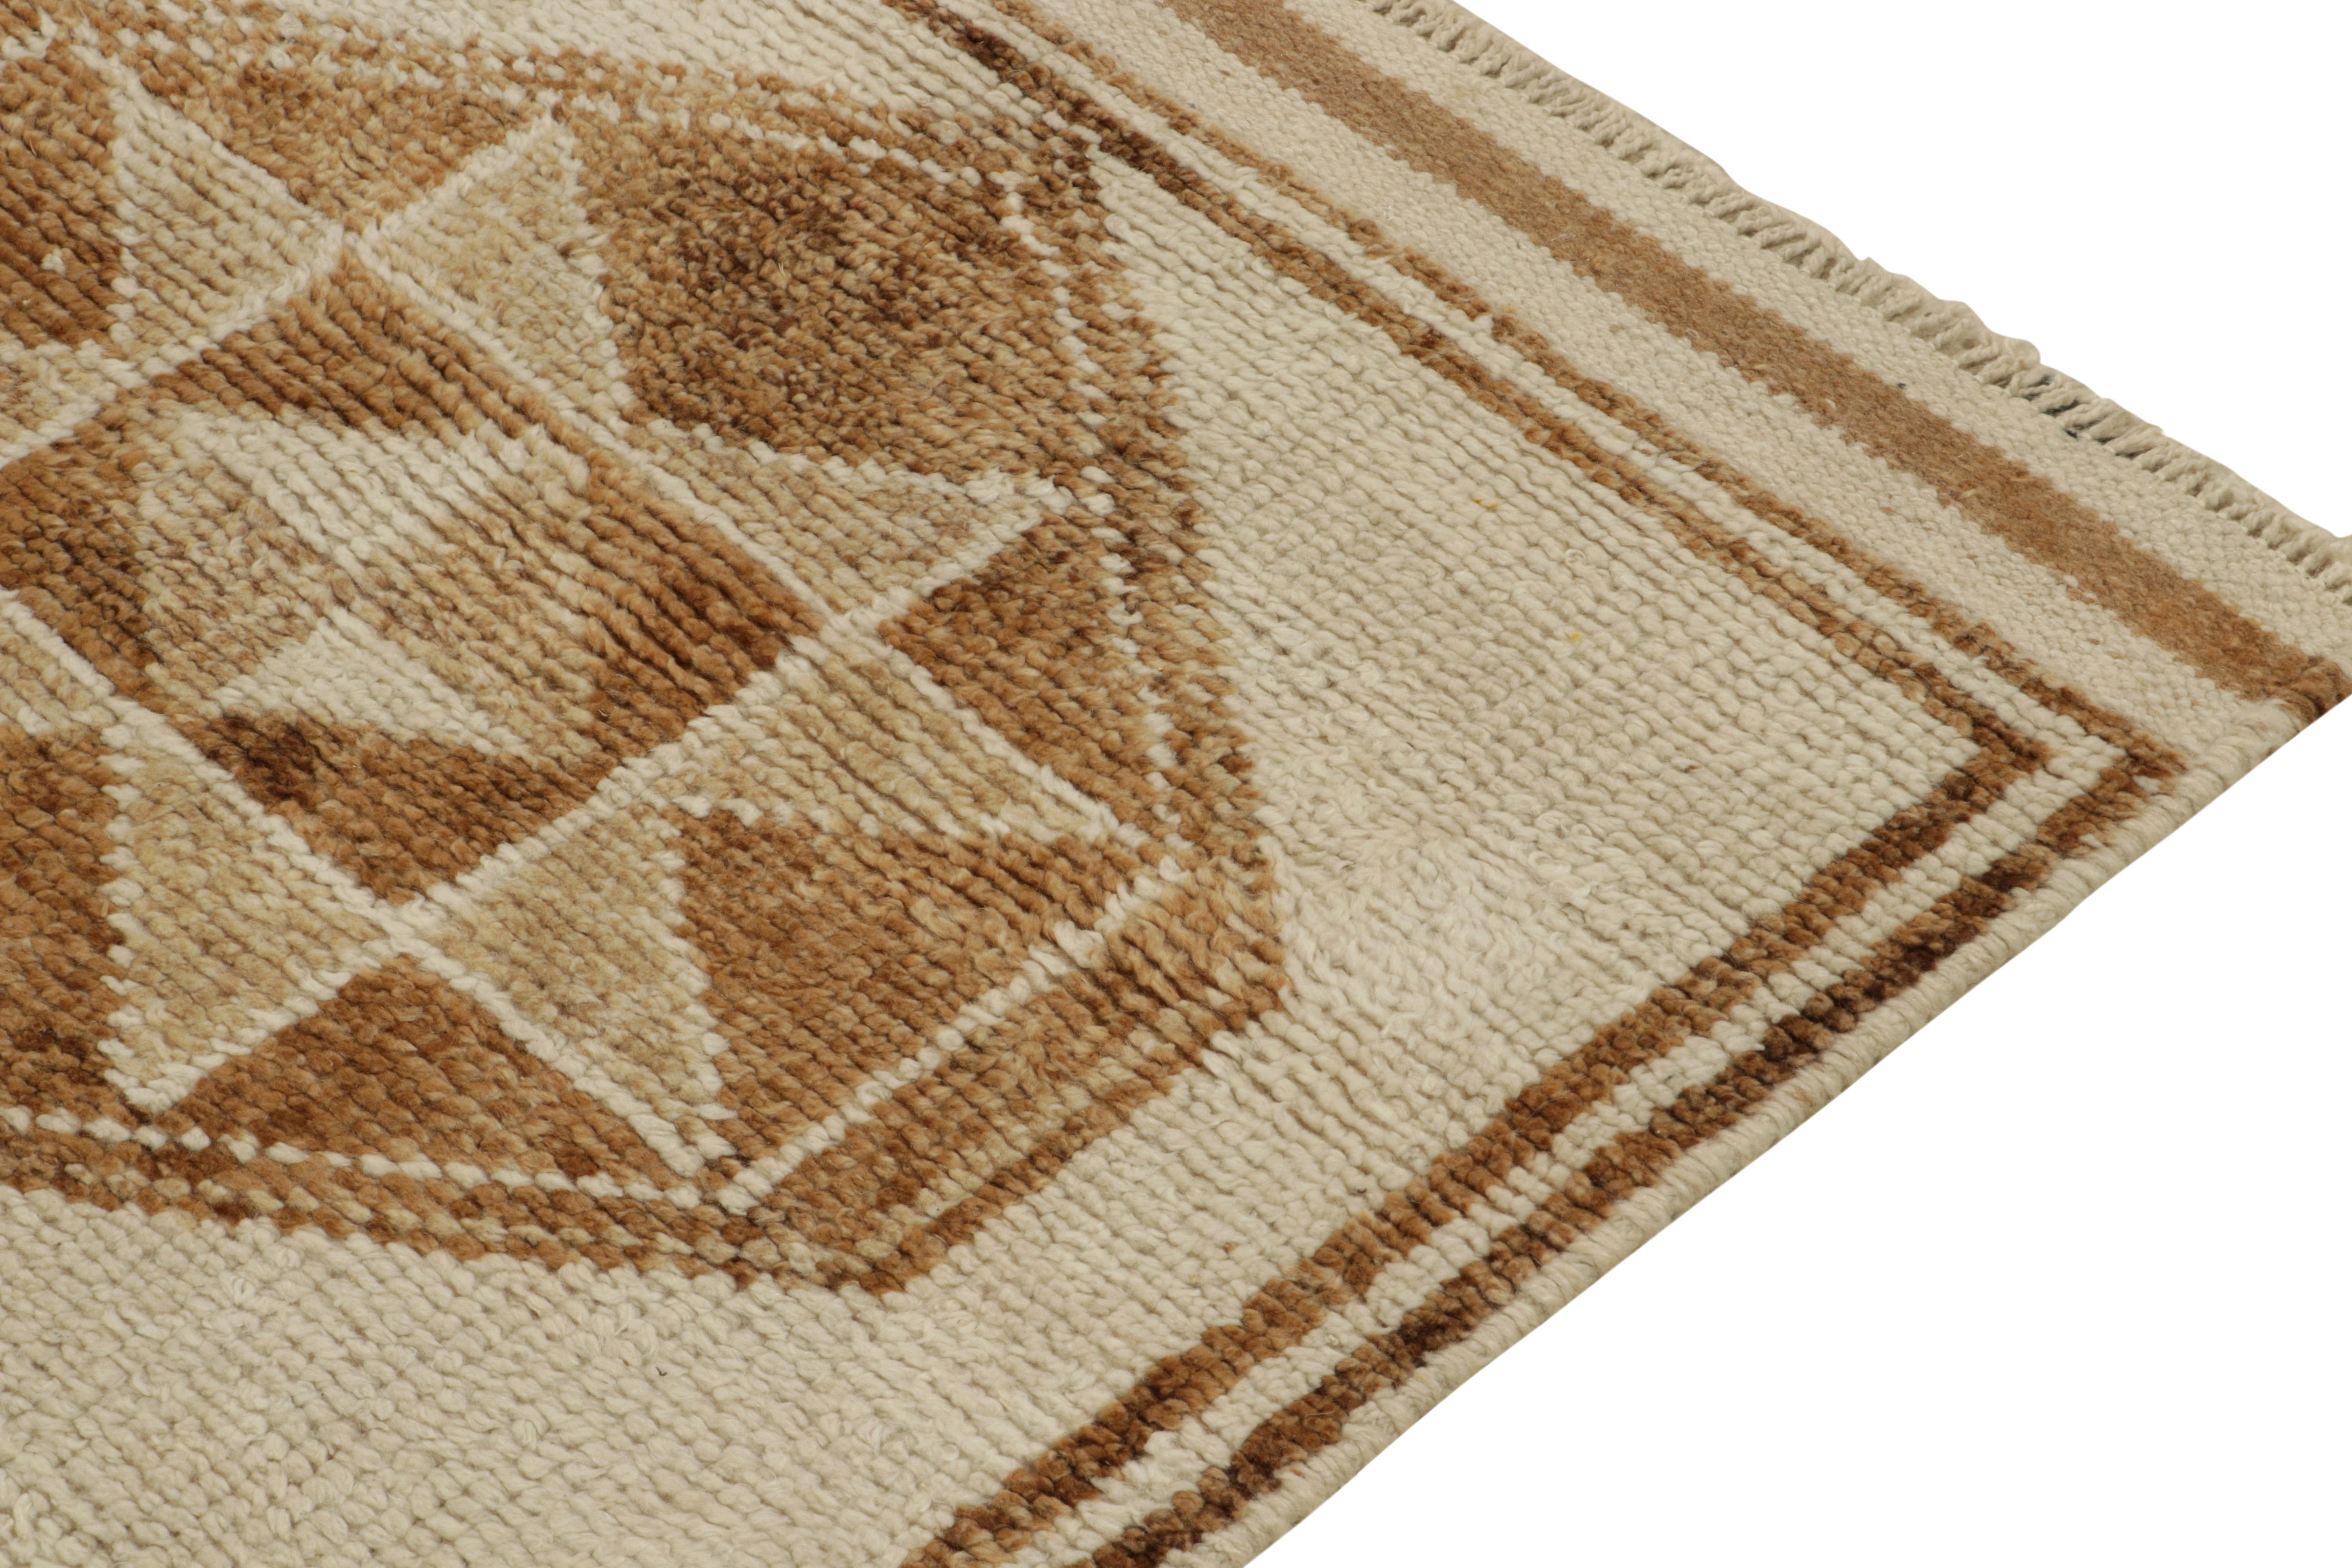 Vintage Tribal Runner in Beige-Brown Geometric Patterns, Star by Rug & Kilim In Good Condition For Sale In Long Island City, NY